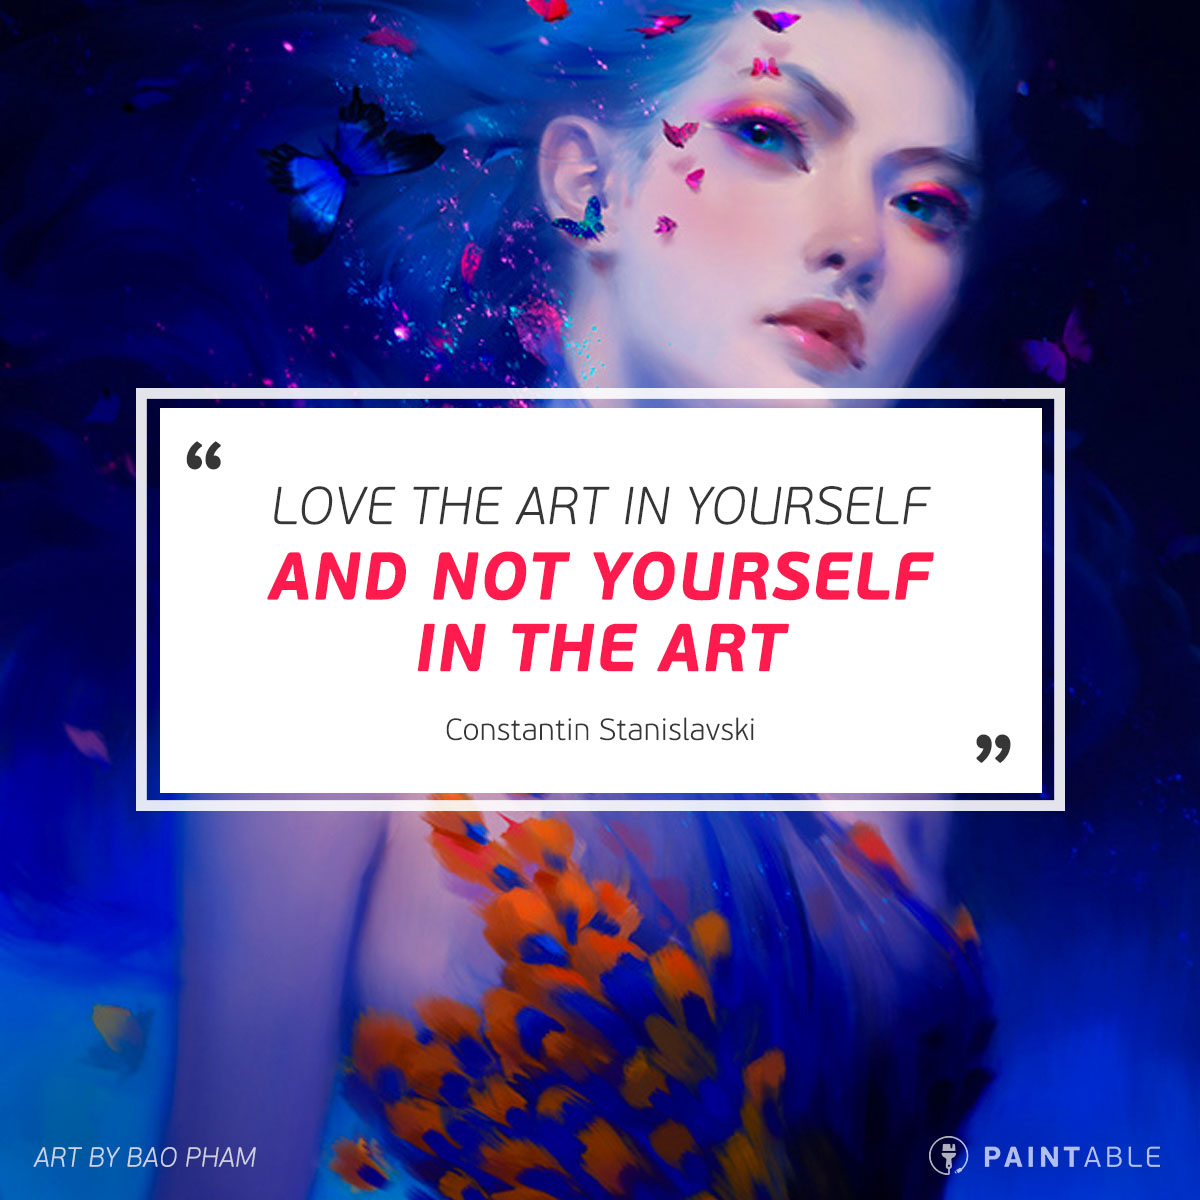 Bao Pham | 25 Inspirational Artist Quotes for Creatives and Digital Painters